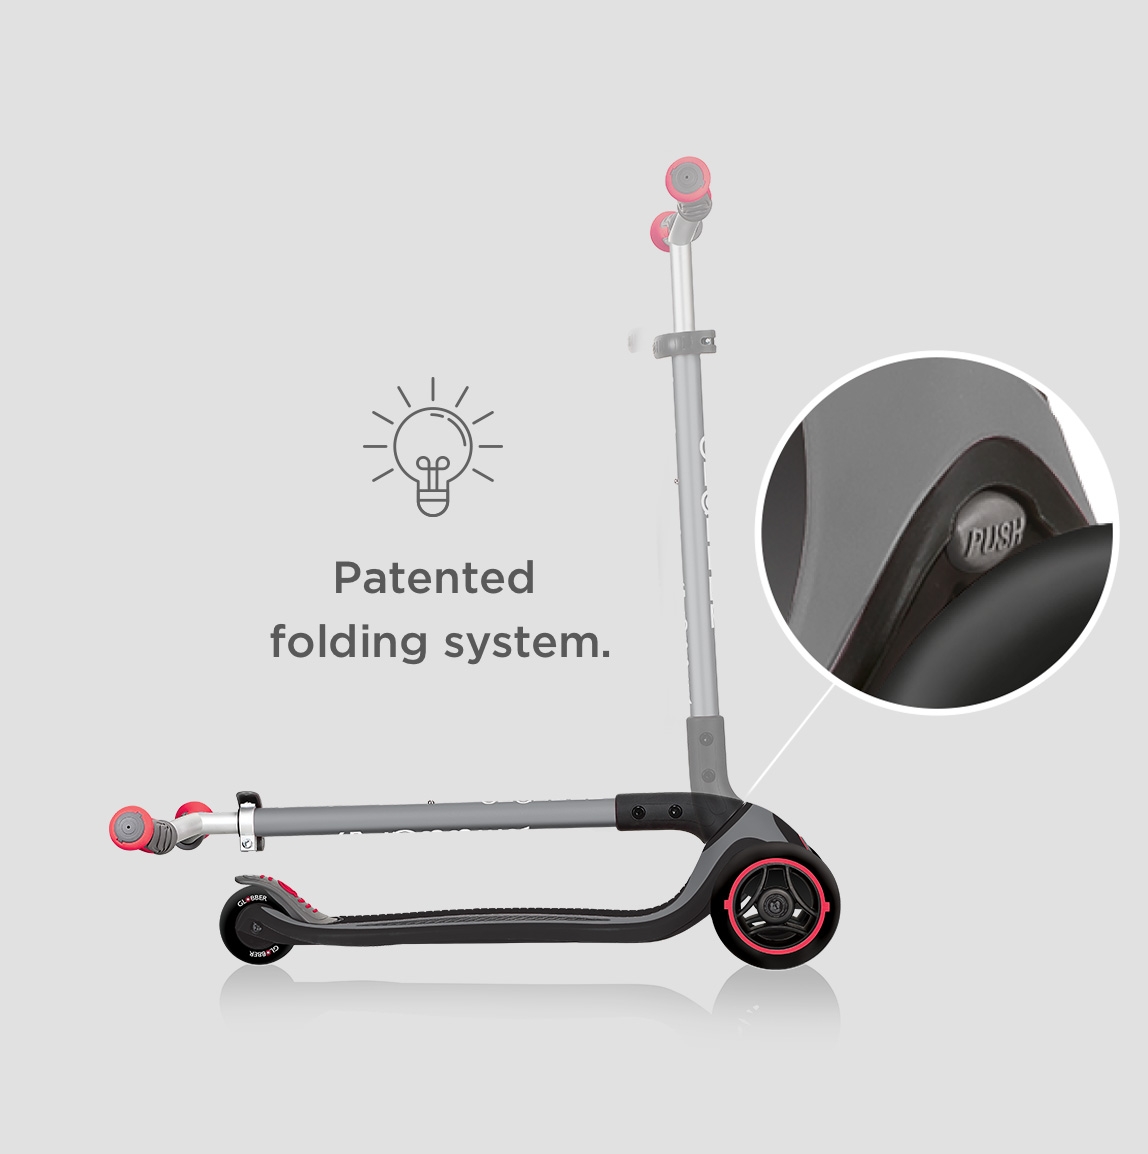 Globber-MASTER-3-wheel-foldable-scooters-with-patented-folding-system-and-push-button-mechanism